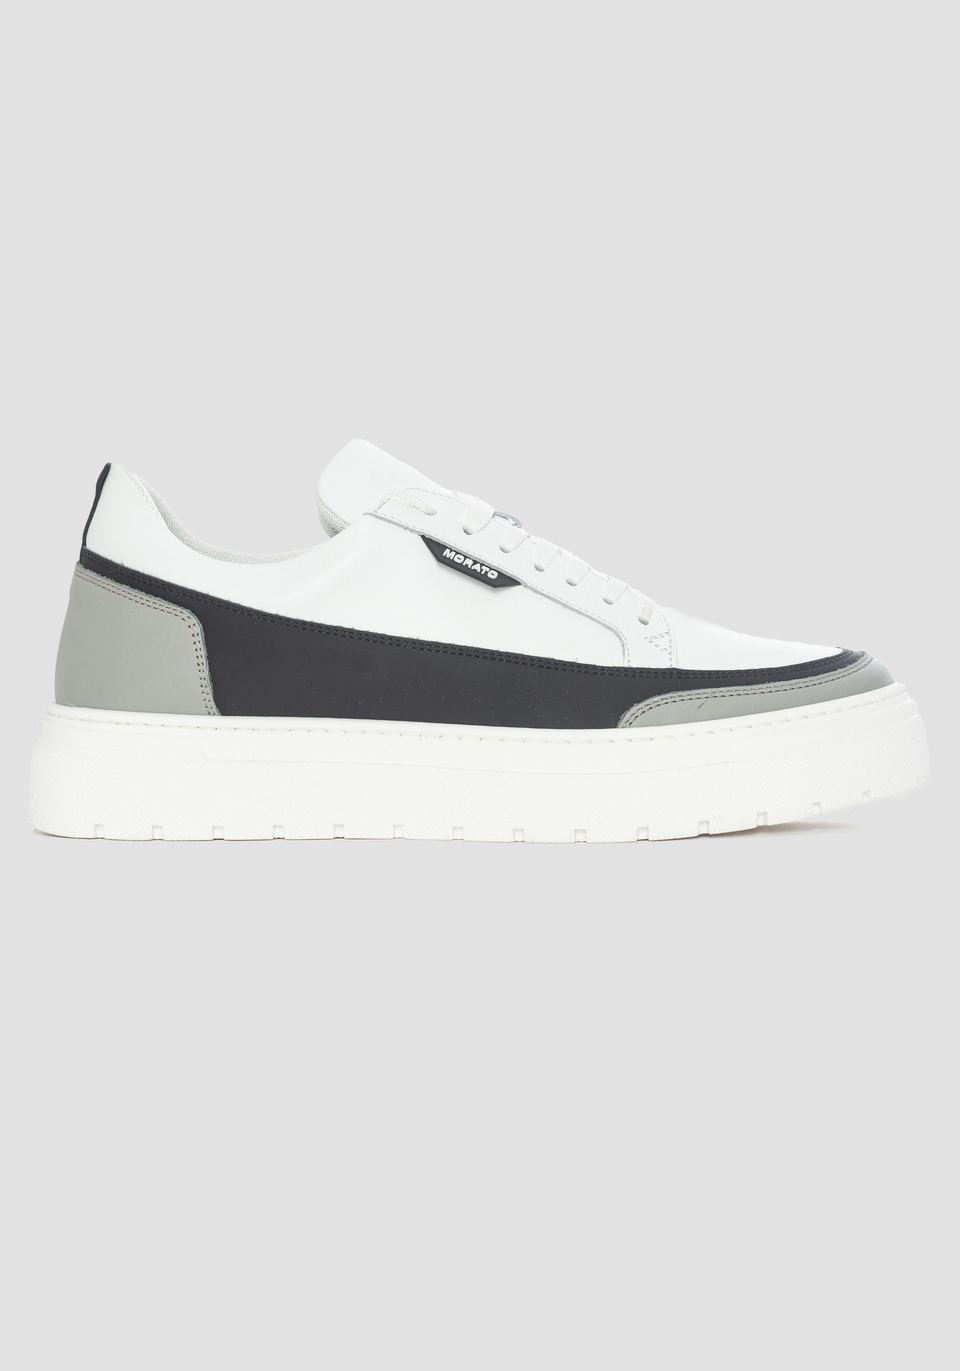 “FLINT” SNEAKERS IN LEATHER AND RUBBERISED FABRIC - Antony Morato Online Shop